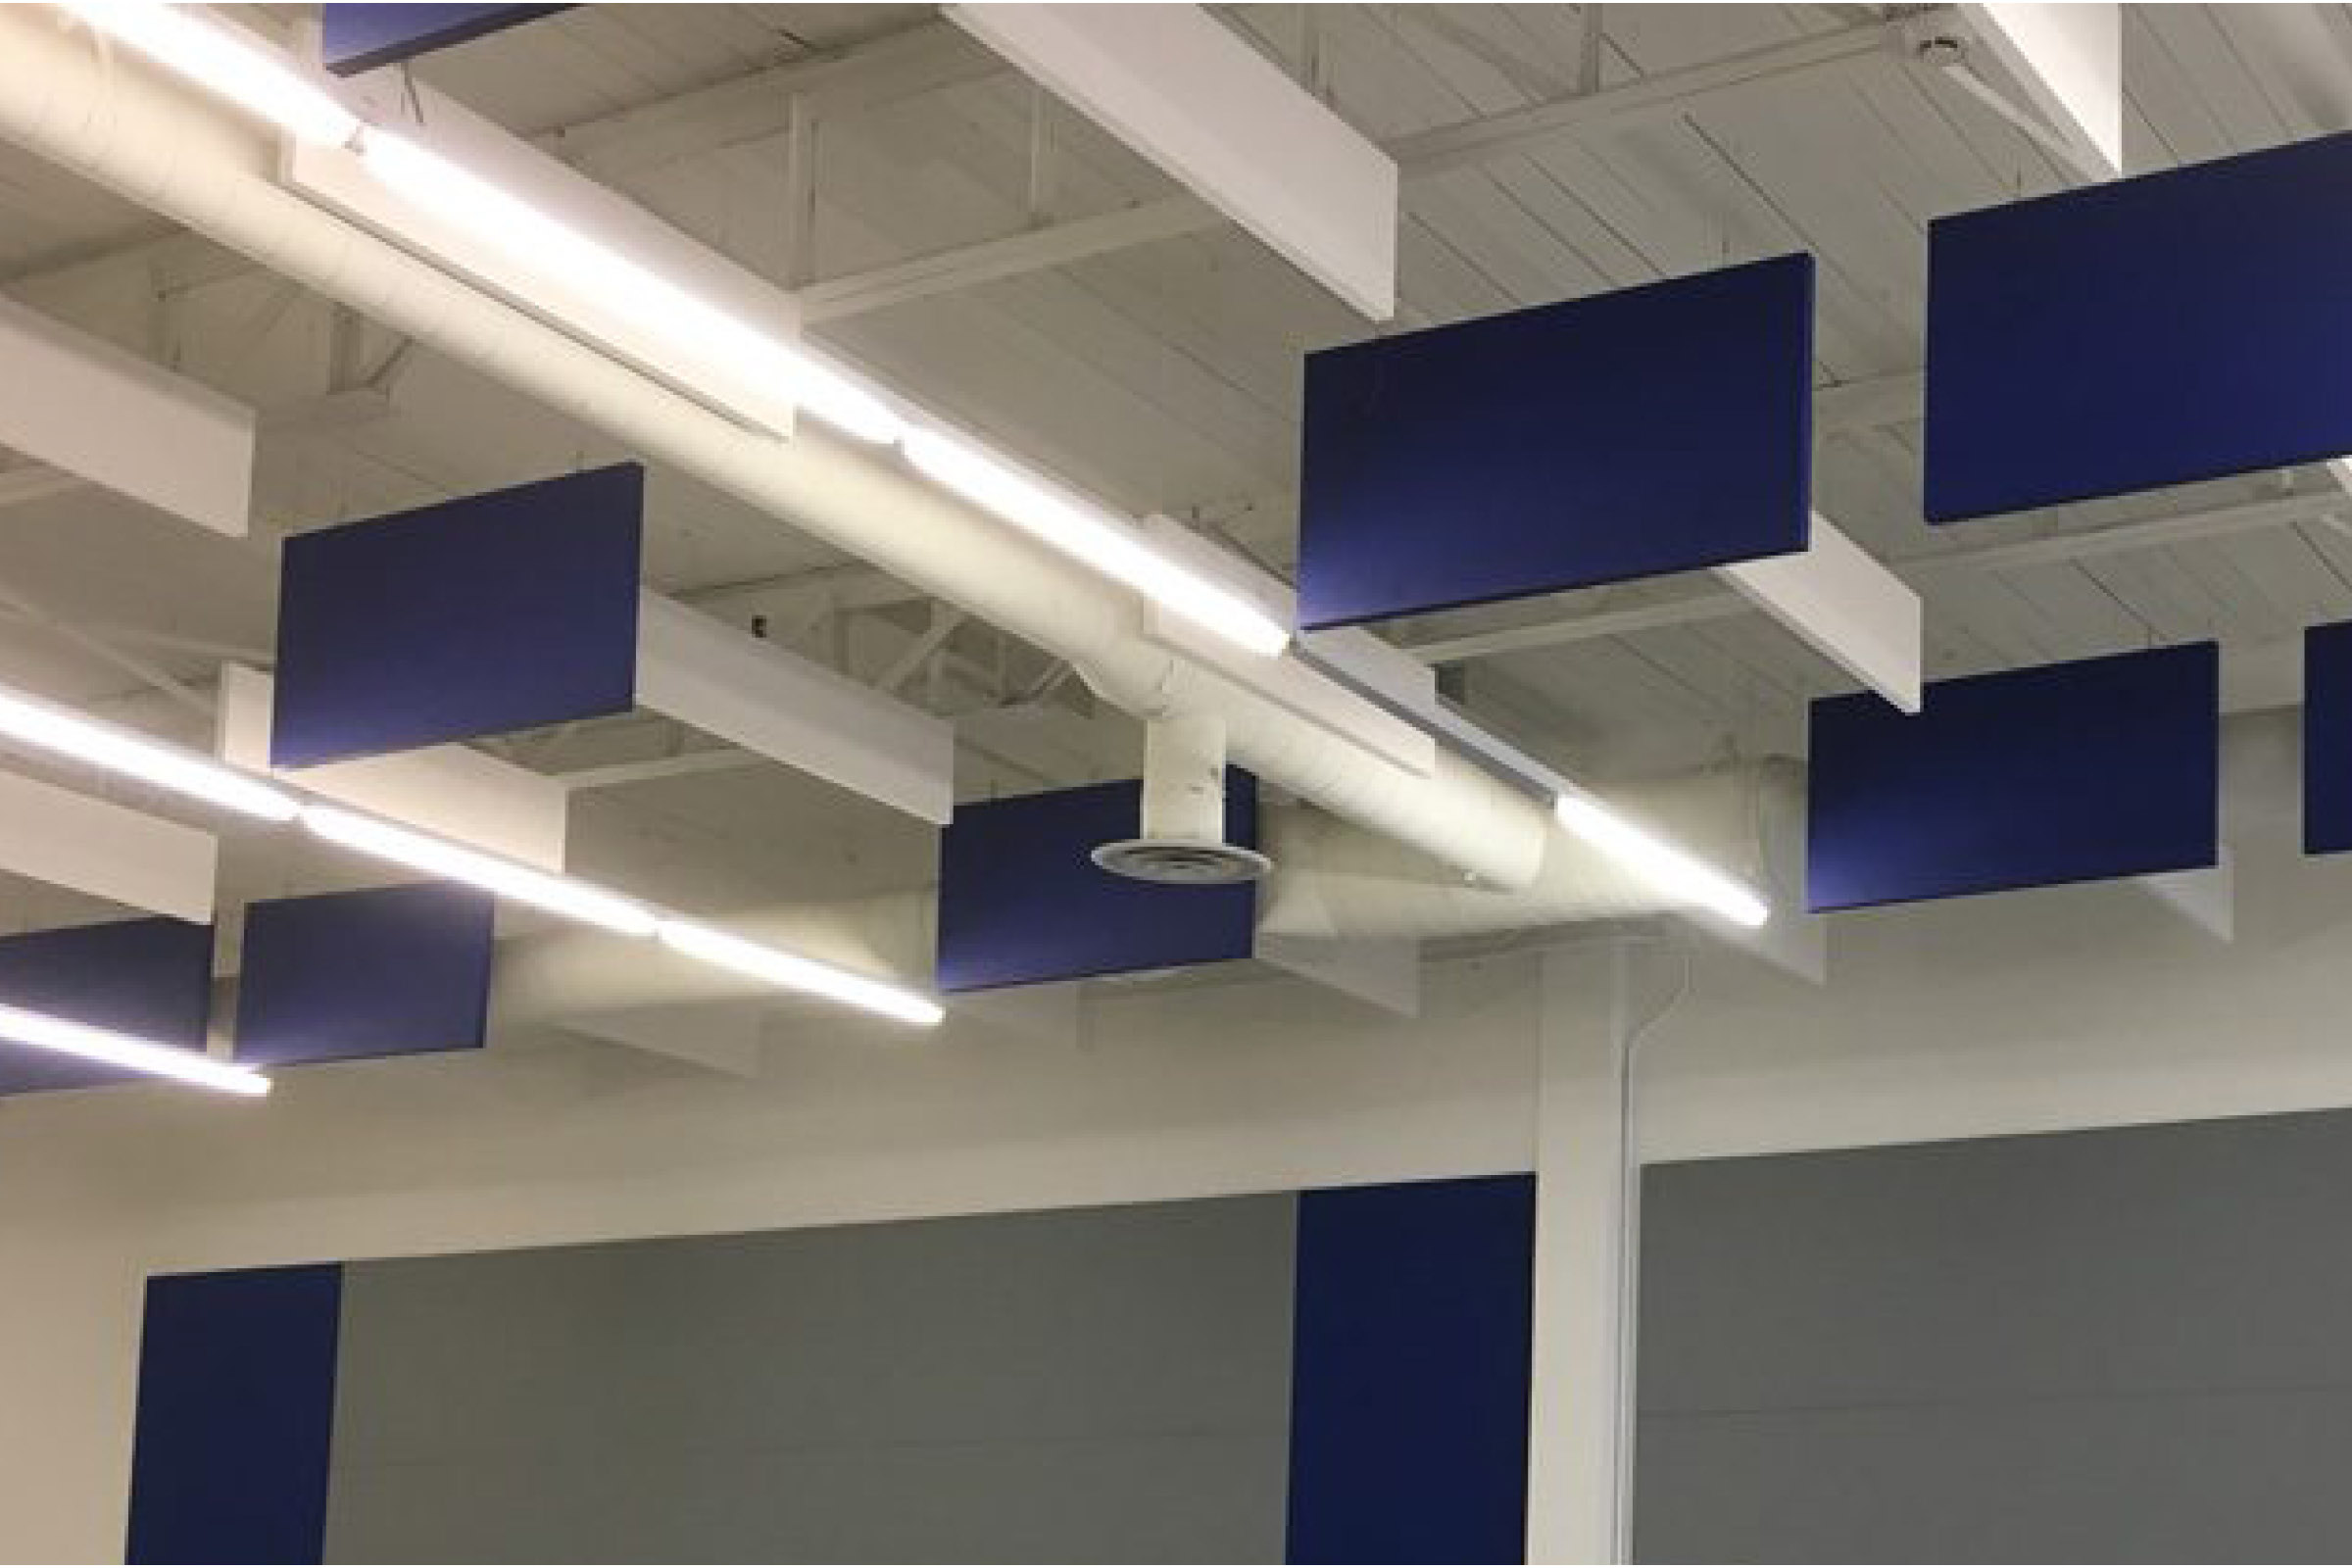 Primacoustic Baffles in a classroom